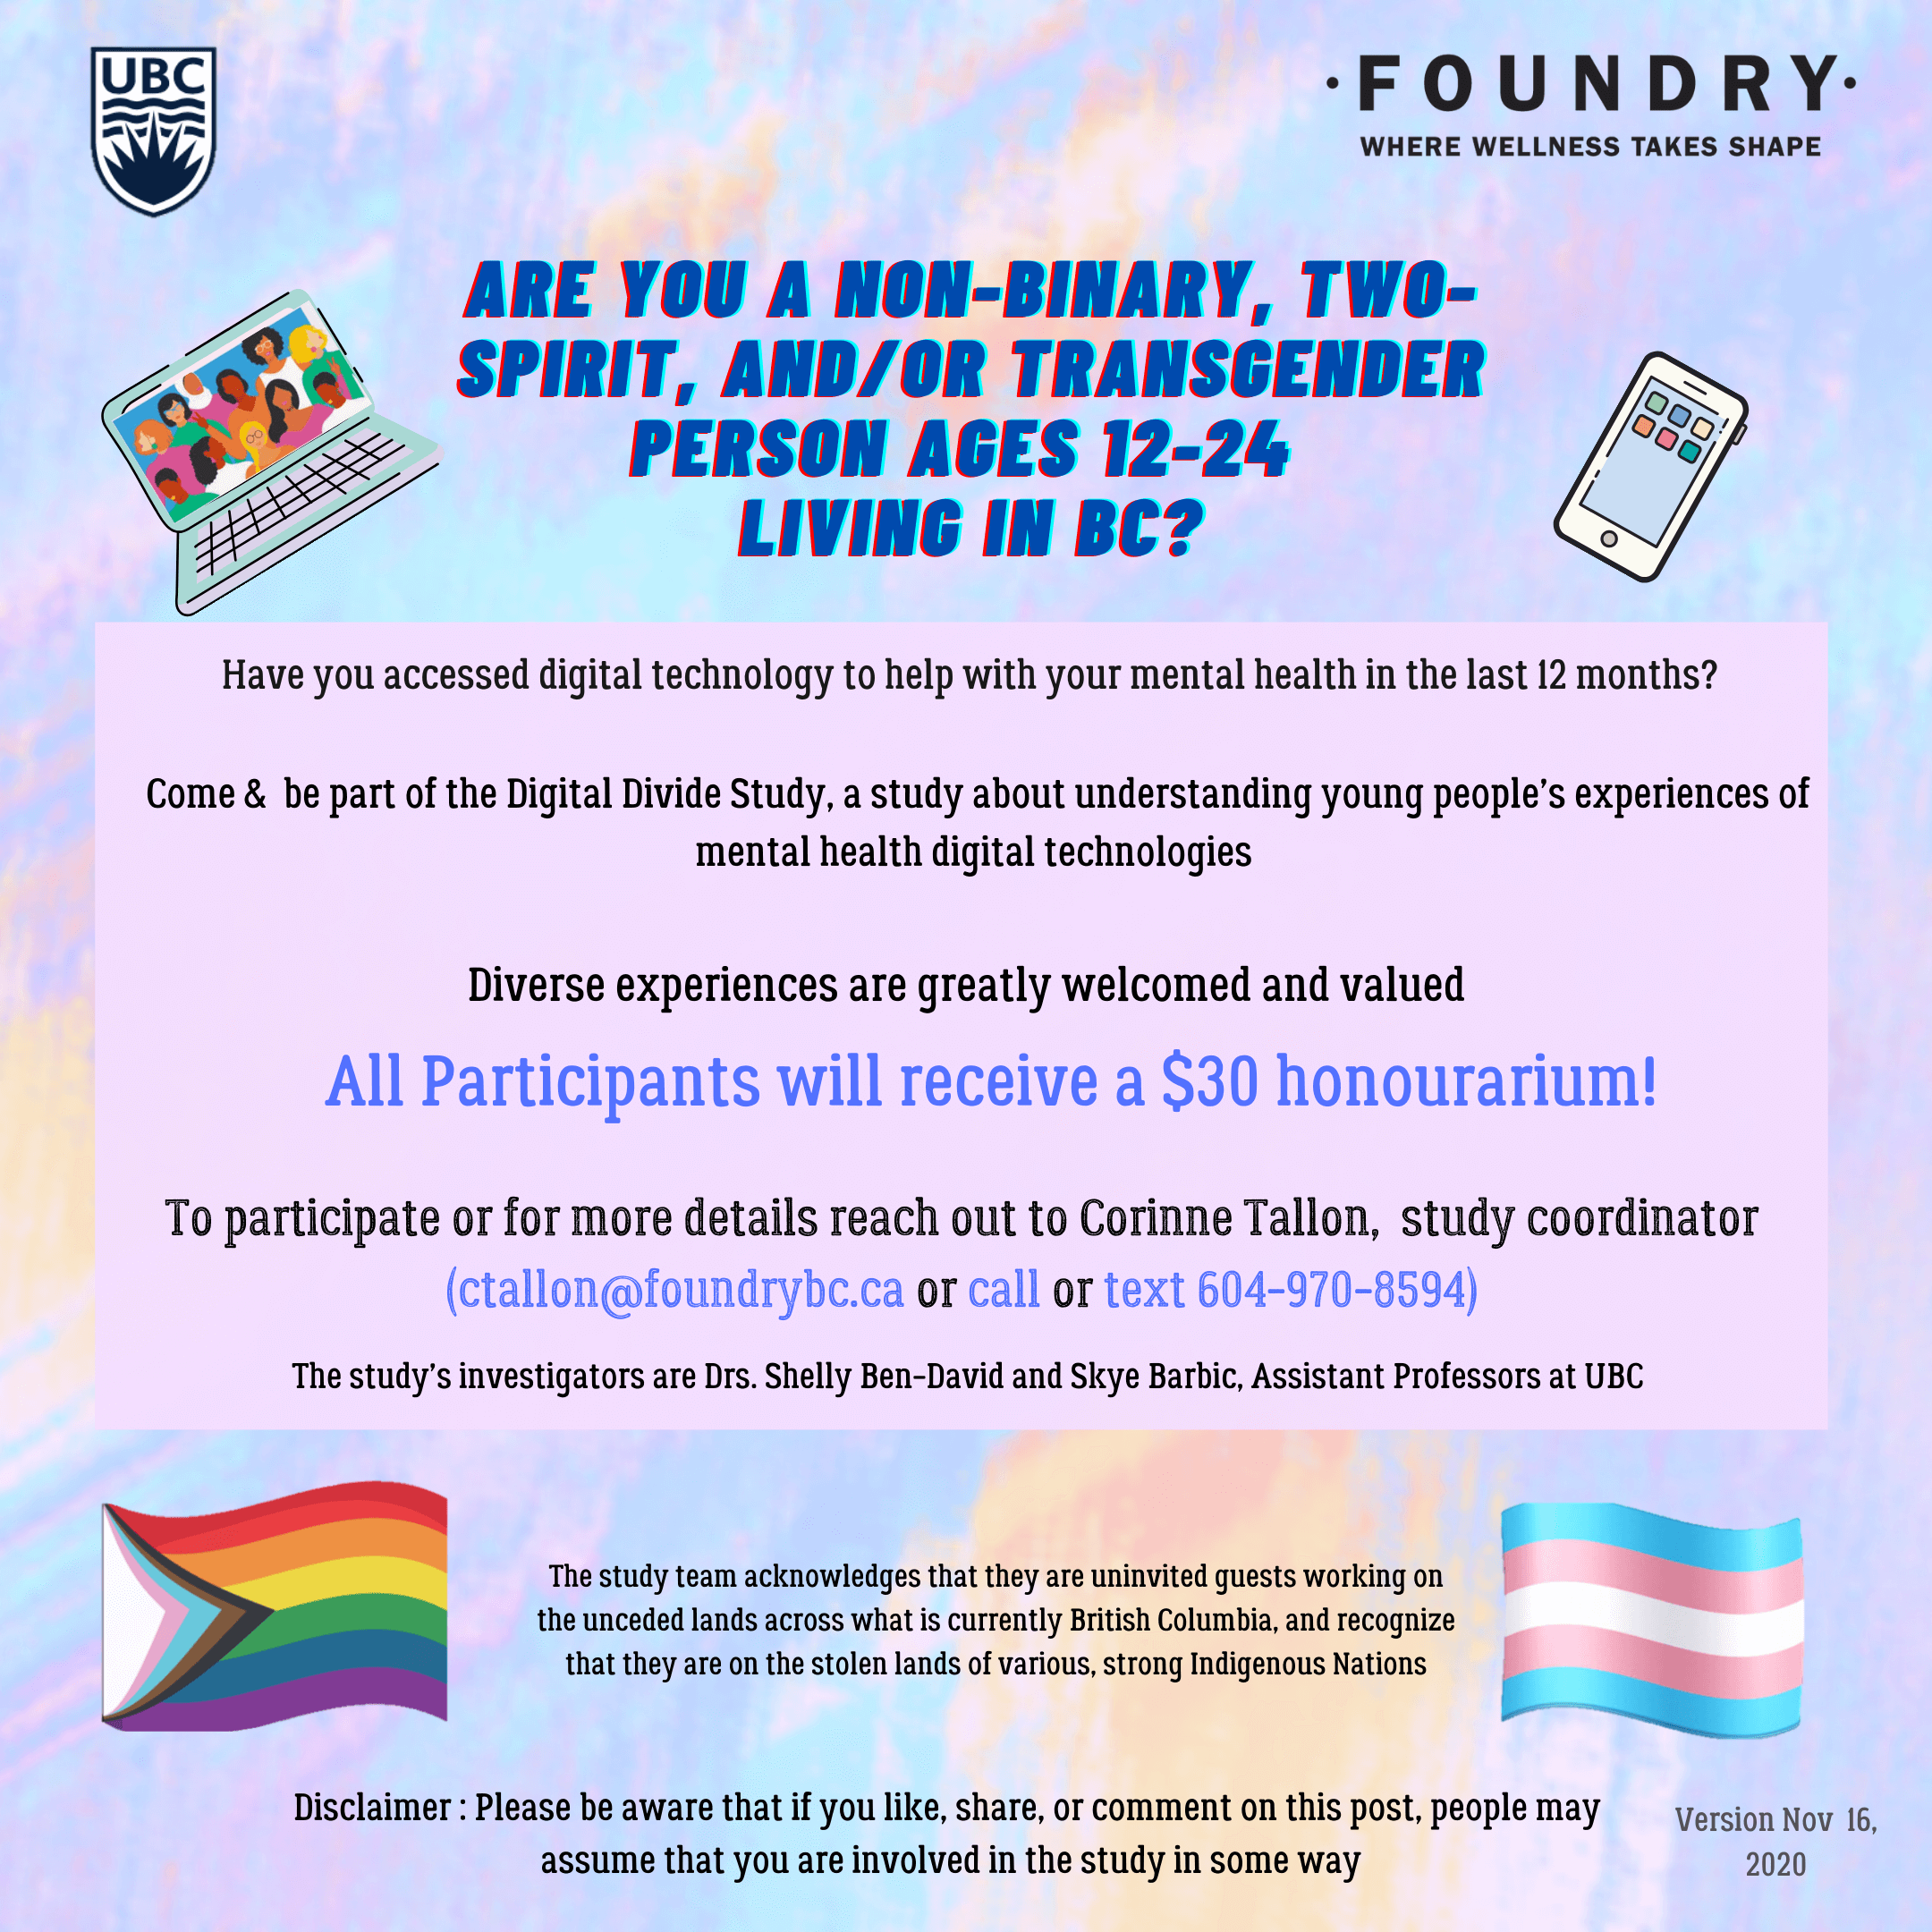 [Image Description: A recruitment poster for a mental health study. 
The background is a light multi-coloured pastel. 
The bold blue text at the top reads “Are you a non-binary, two-spirit, and/or transgender person ages 12-24 living in BC?” 
A light grey box appears under the bold blue text and features three bullet points with black text. 
The black text of the first bullet point reads “Have you accessed digital technology to help with your mental health in the last 12 months?” 
The black text of the second bullet point reads “Come and be part of the Digital Divide Study, a study about understanding young people’s experiences with mental health digital technologies.” 
The black text of the third and final bullet point reads “Diverse experiences are greatly welcomed and valued.” 
Under that, blue text reads “All participants will receive a $30 honorarium!” 
Black text under that reads “To participate or for more details, reach out to Corinne Tallon, study coordinator (ctallon@foundrybc.ca or call or text 604-970-8594).” 
Under the participation details, black text reads “The study’s investigators are Drs. Shelly-Ben David and Skye Barbic, Assistant Professors at UBC.” 
Under that is a land acknowledgement that reads “The study team acknowledges that they are uninvited guests working on the unceded lands across what is currently British Columbia, and recognize that they are on the stolen lands of various, strong Indigenous Nations.” 
A disclaimer in black text appears at the very bottom of the poster and it reads “Disclaimer: Please be aware that if you like, share, or comment on this post, people may assume that you are involved in the study in some way.” 
Four graphics appear on either side of the poster. 
The top left graphic is of a laptop with an image of people of all different races, religions and genders on the screen. 
The top right graphic is of a white smartphone with six different coloured applications. The bottom left graphic is of a trans BIPOC-inclusive pride flag. 
The bottom right graphic is of a trans pride flag  
The top of the poster in each corner feature the University of British Columbia’s logo and Foundry BC’s logo.]